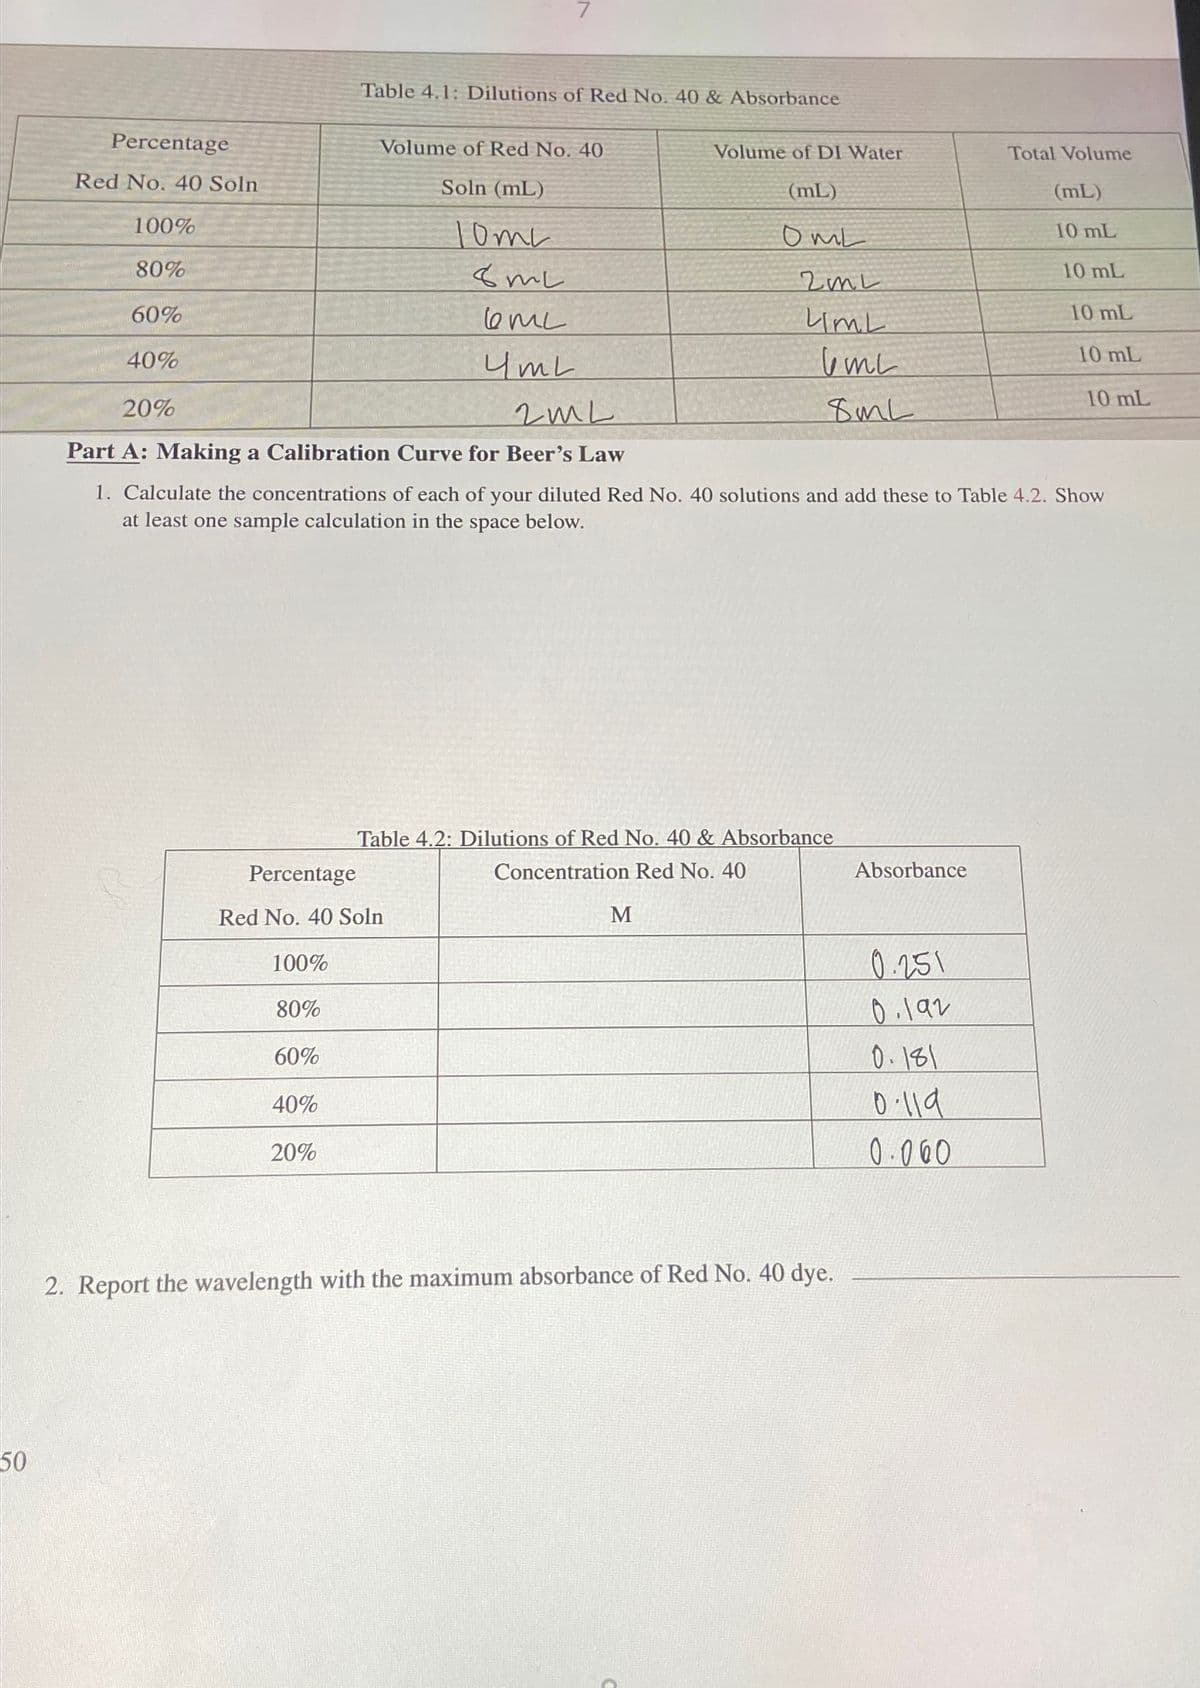 50
Percentage
Red No. 40 Soln
100%
80%
60%
40%
Table 4.1: Dilutions of Red No. 40 & Absorbance
Volume of Red No. 40
Soln (mL)
10me
8mL
опи
4mL
Percentage
Red No. 40 Soln
100%
80%
60%
40%
20%
Volume of DI Water
(mL)
OML
2mL
LIML
M
UML
8ML
Table 4.2: Dilutions of Red No. 40 & Absorbance
Concentration Red No. 40
2. Report the wavelength with the maximum absorbance of Red No. 40 dye.
Absorbance
20%
2ML
Part A: Making a Calibration Curve for Beer's Law
1. Calculate the concentrations of each of your diluted Red No. 40 solutions and add these to Table 4.2. Show
at least one sample calculation in the space below.
0.251
0.192
Total Volume
0.181
0·119
0.060
(mL)
10 mL
10 mL
10 mL
10 mL
10 mL